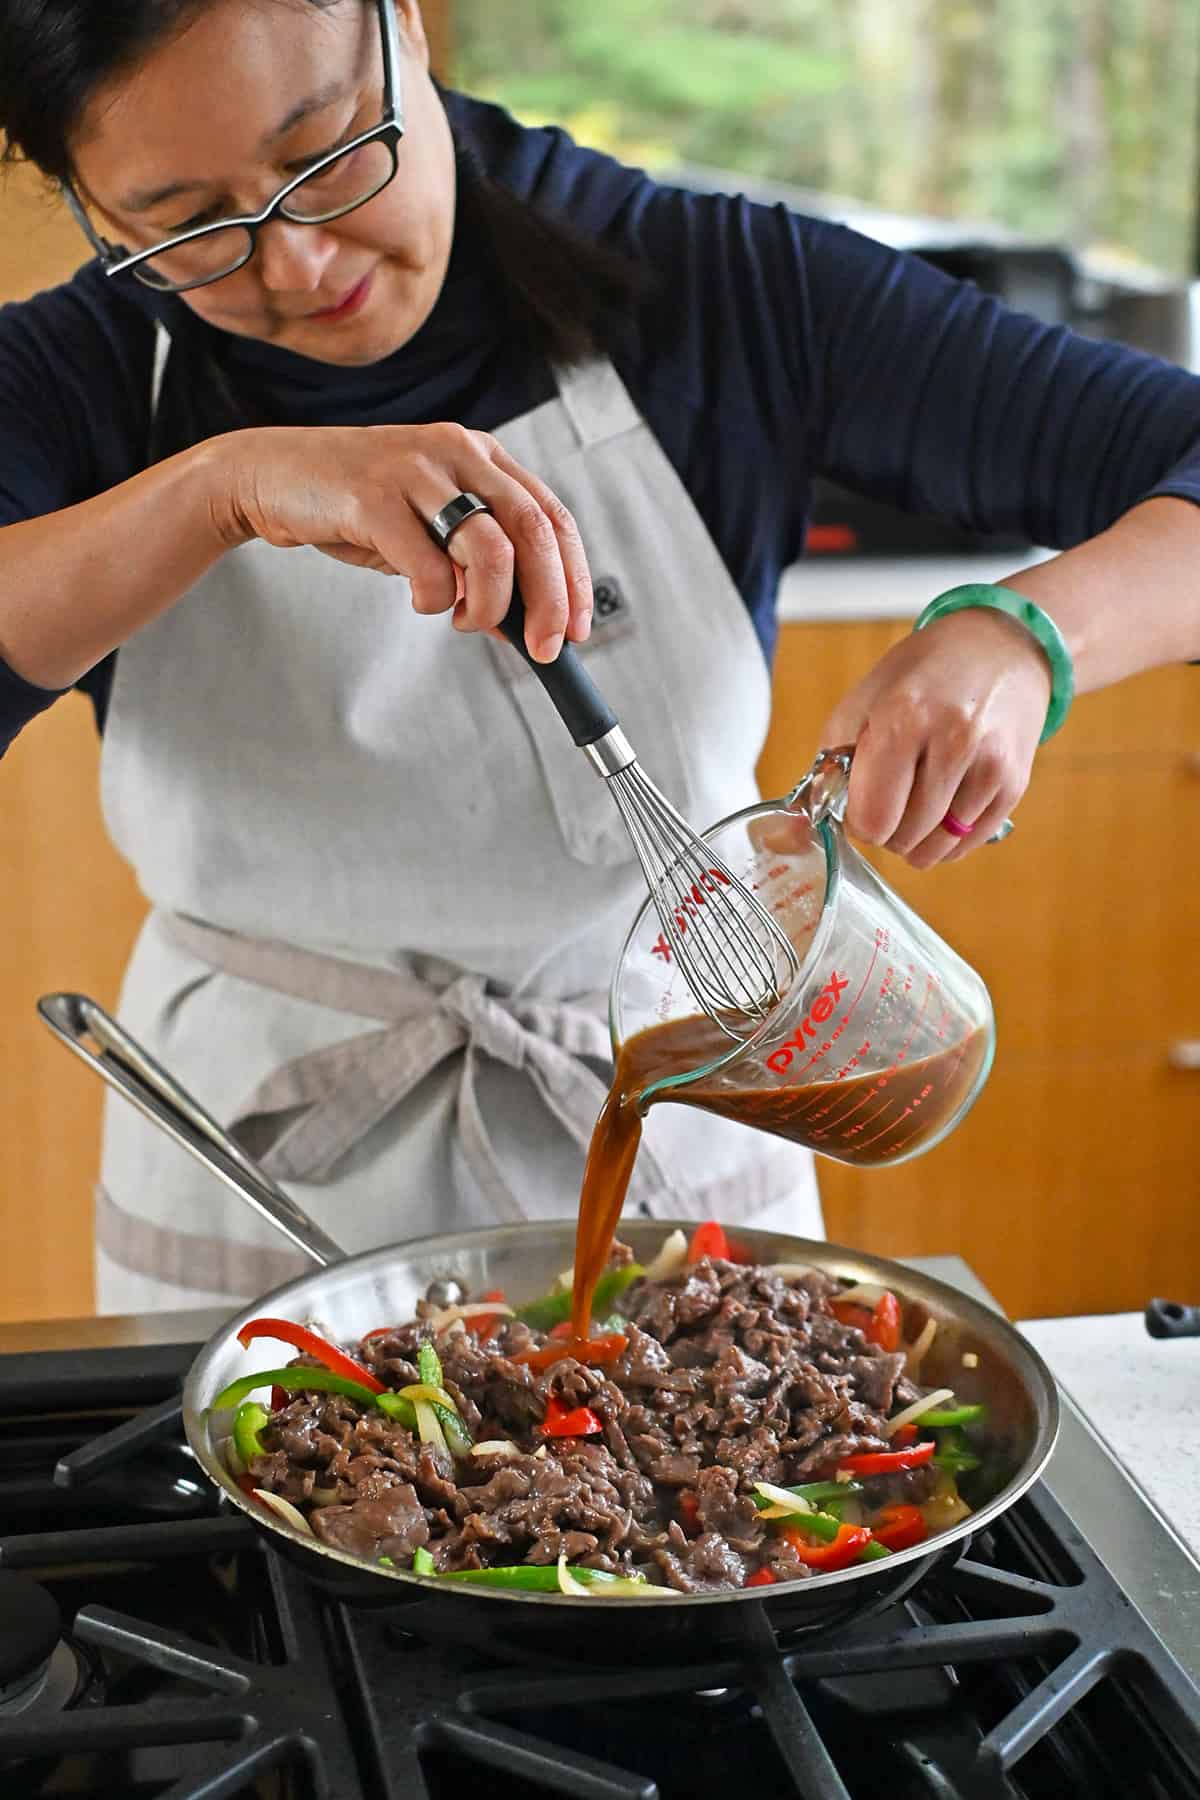 Pouring a brown sauce into a pan filled with cooked flank steak, sliced onions, and bell peppers.